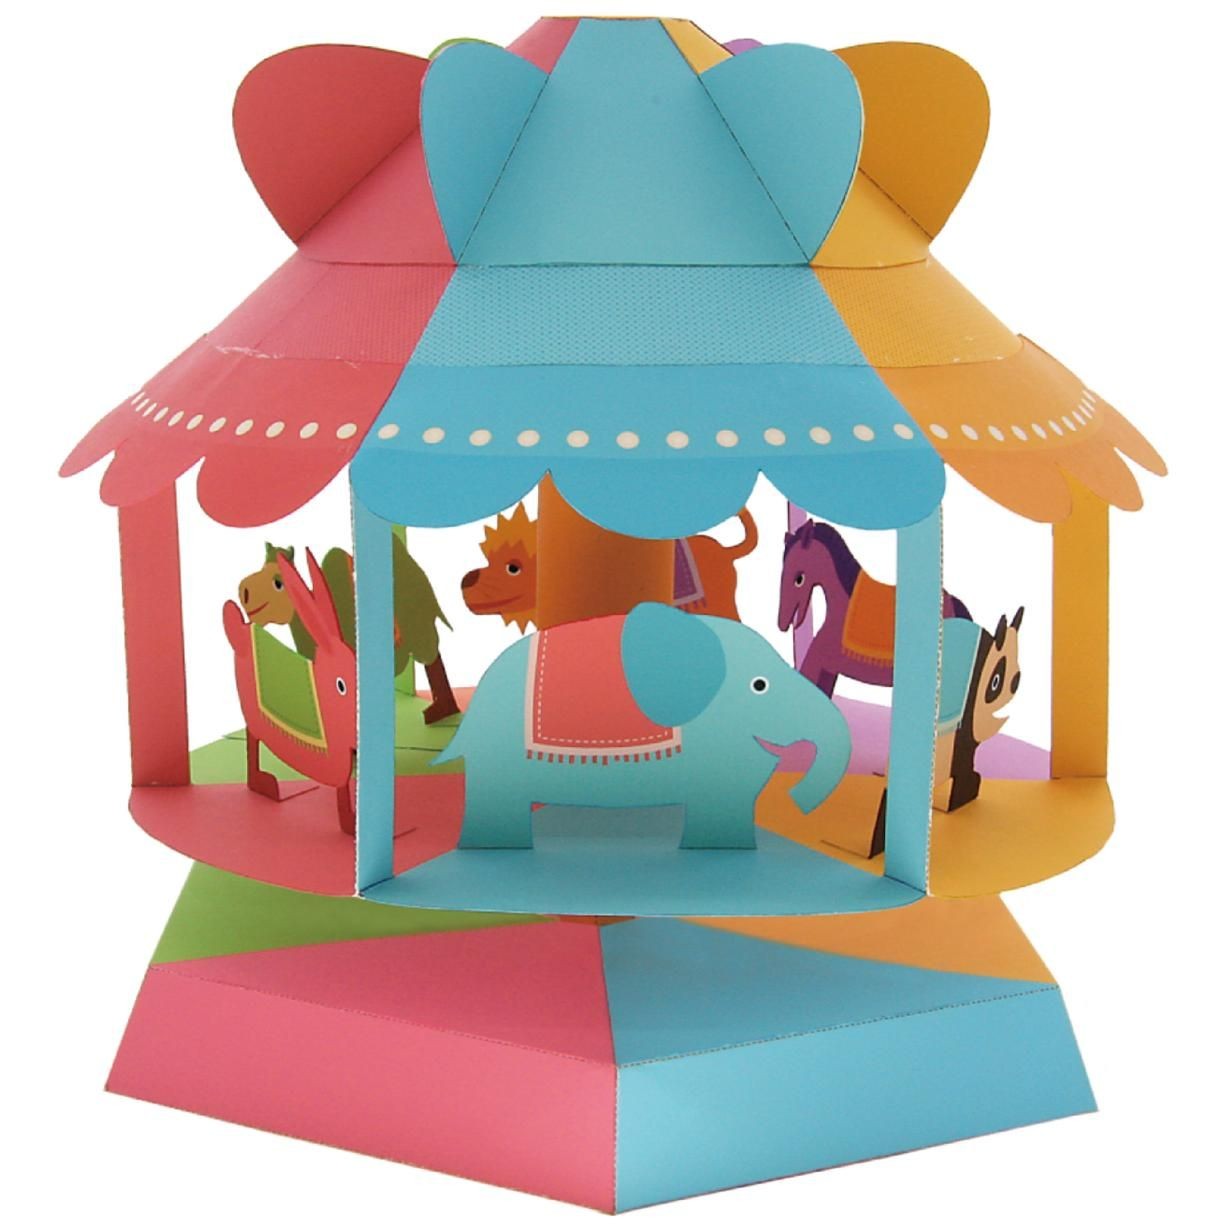 Canon Creative Park Papercraft Wind Powered Merry Go Round toys Paper Craft Educational Rabbit